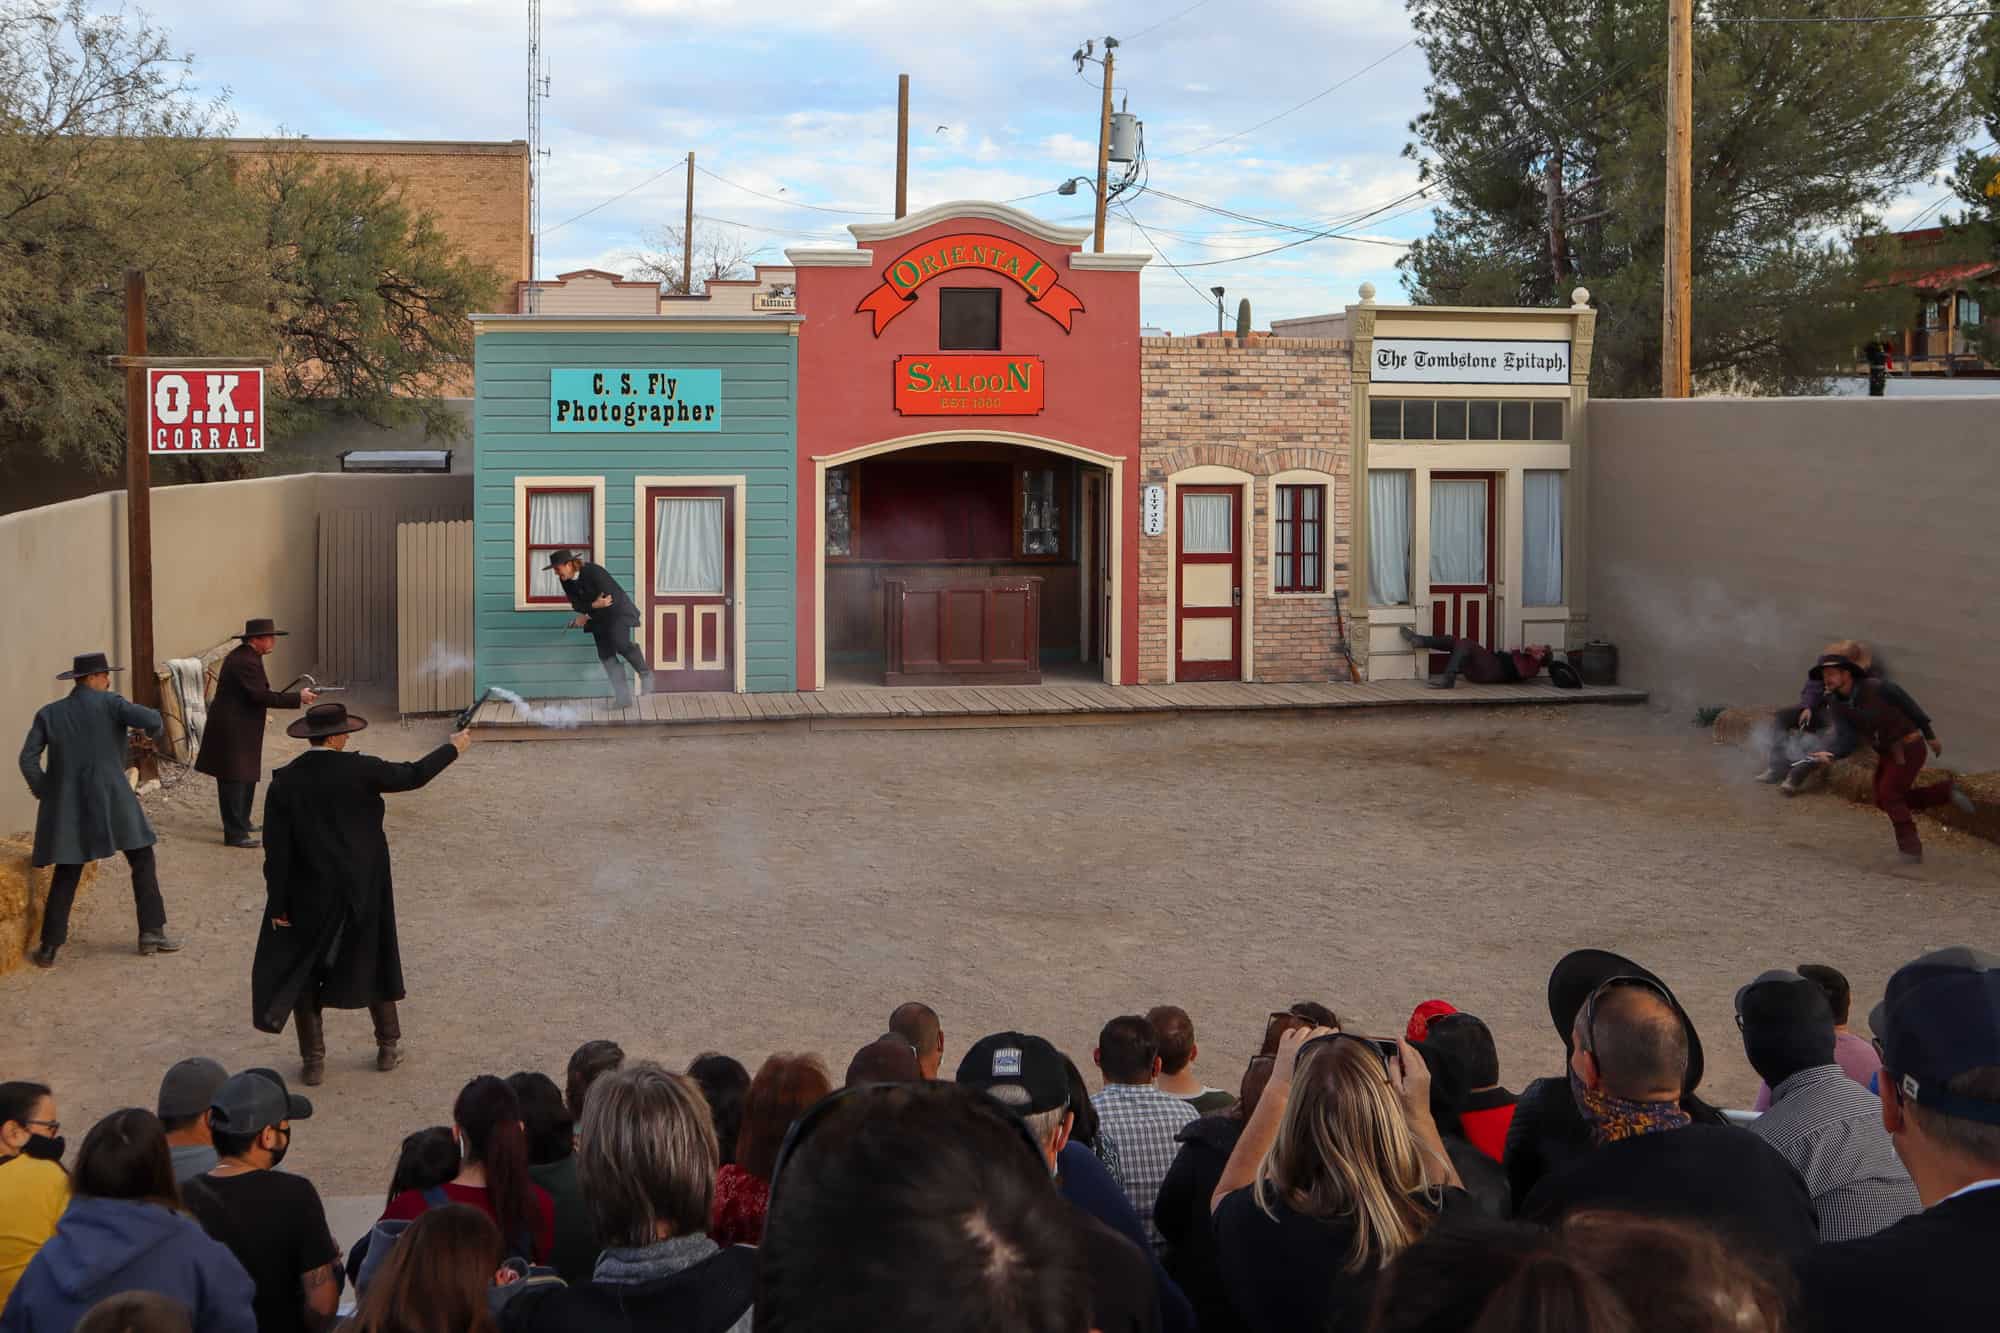 the gunfight show at the ok corral is definitely something that tops the things to do in tombstone, az